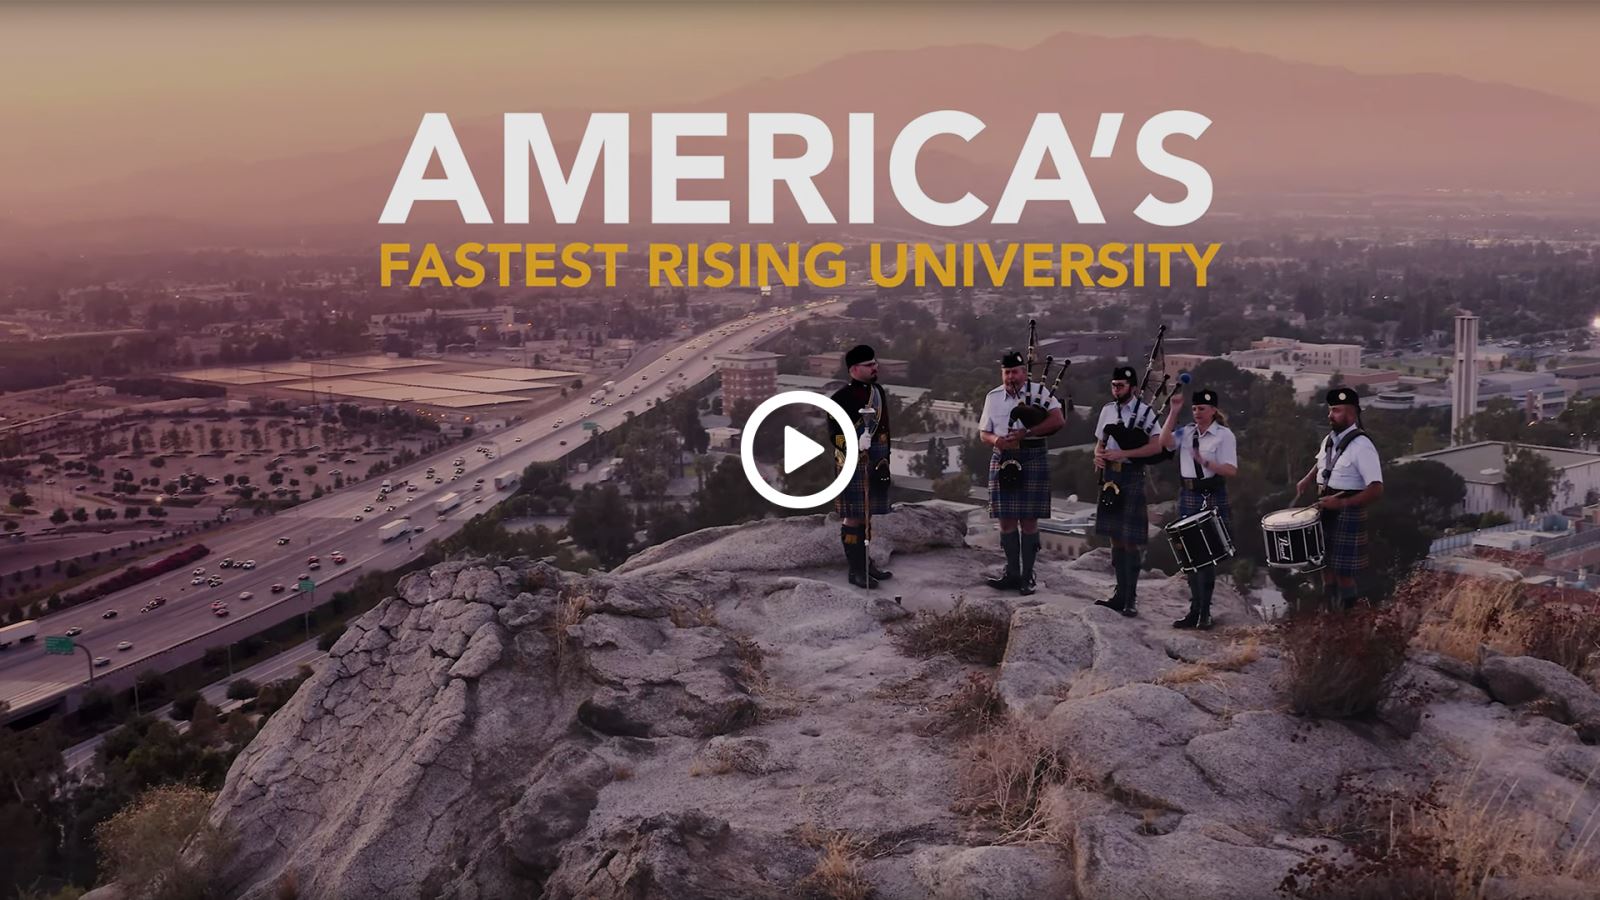 Learn why UCR is America's fastest-rising university!